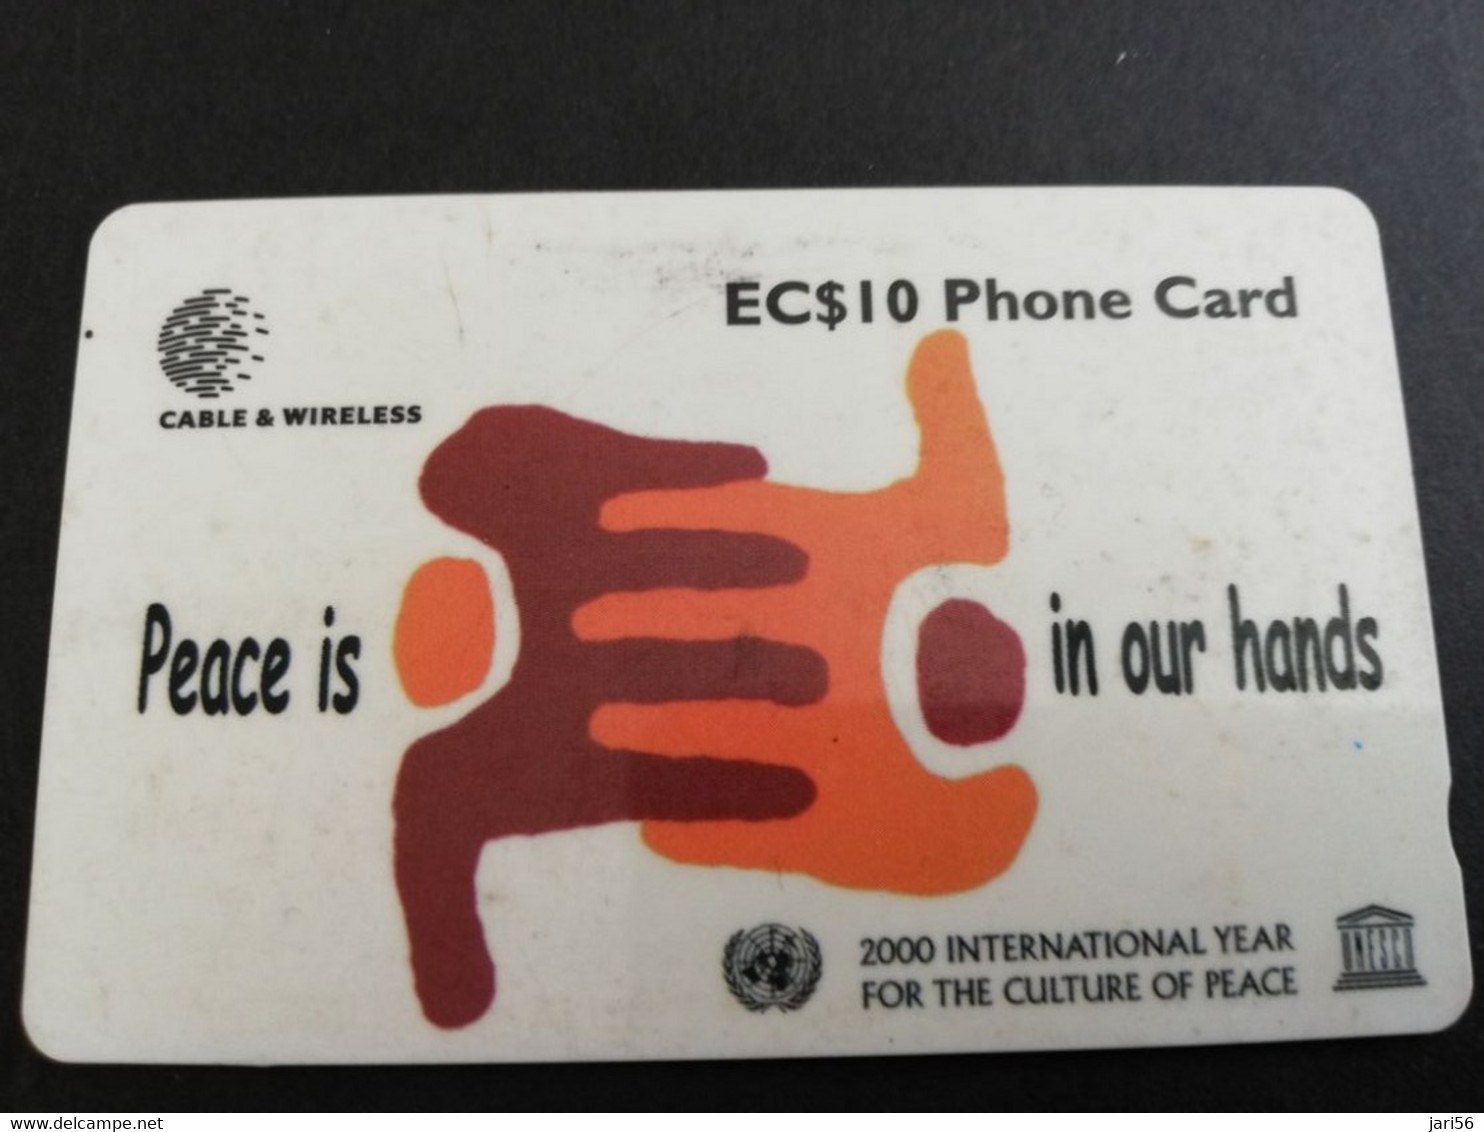 ST LUCIA    $ 10  CABLE & WIRELESS   PEACE IN OUR HANDS   338CSLB   Fine Used Card ** 5305** - Saint Lucia